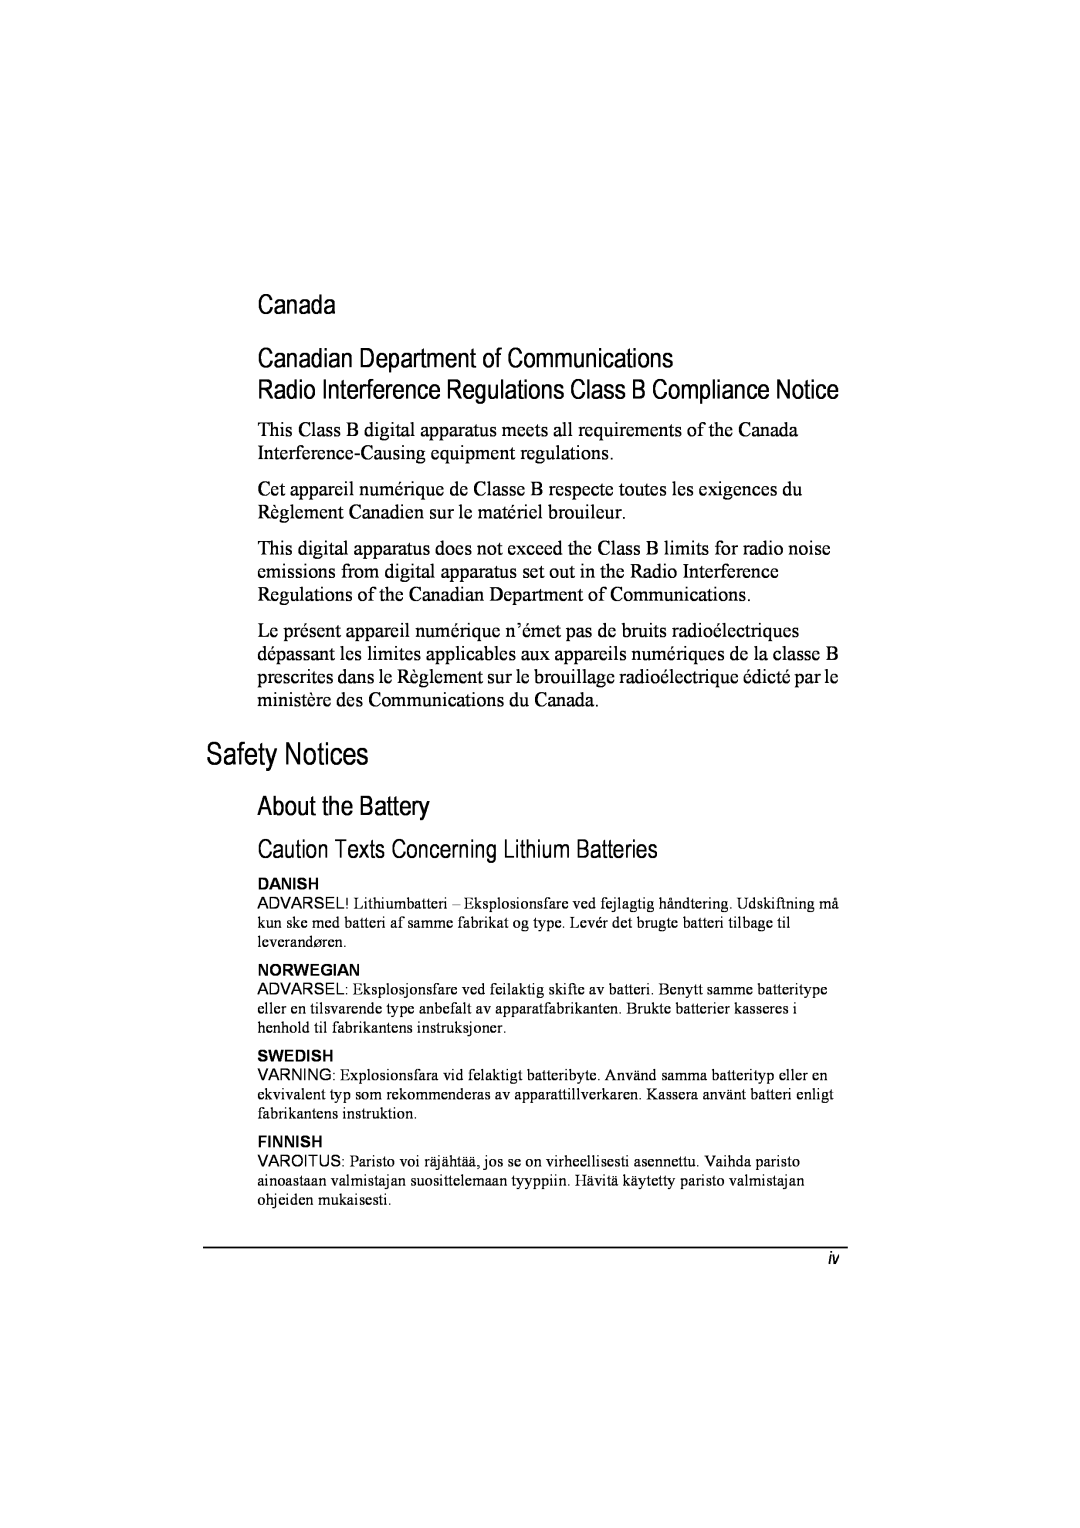 TAG 20 Series manual Safety Notices, Canada Canadian Department of Communications, About the Battery 